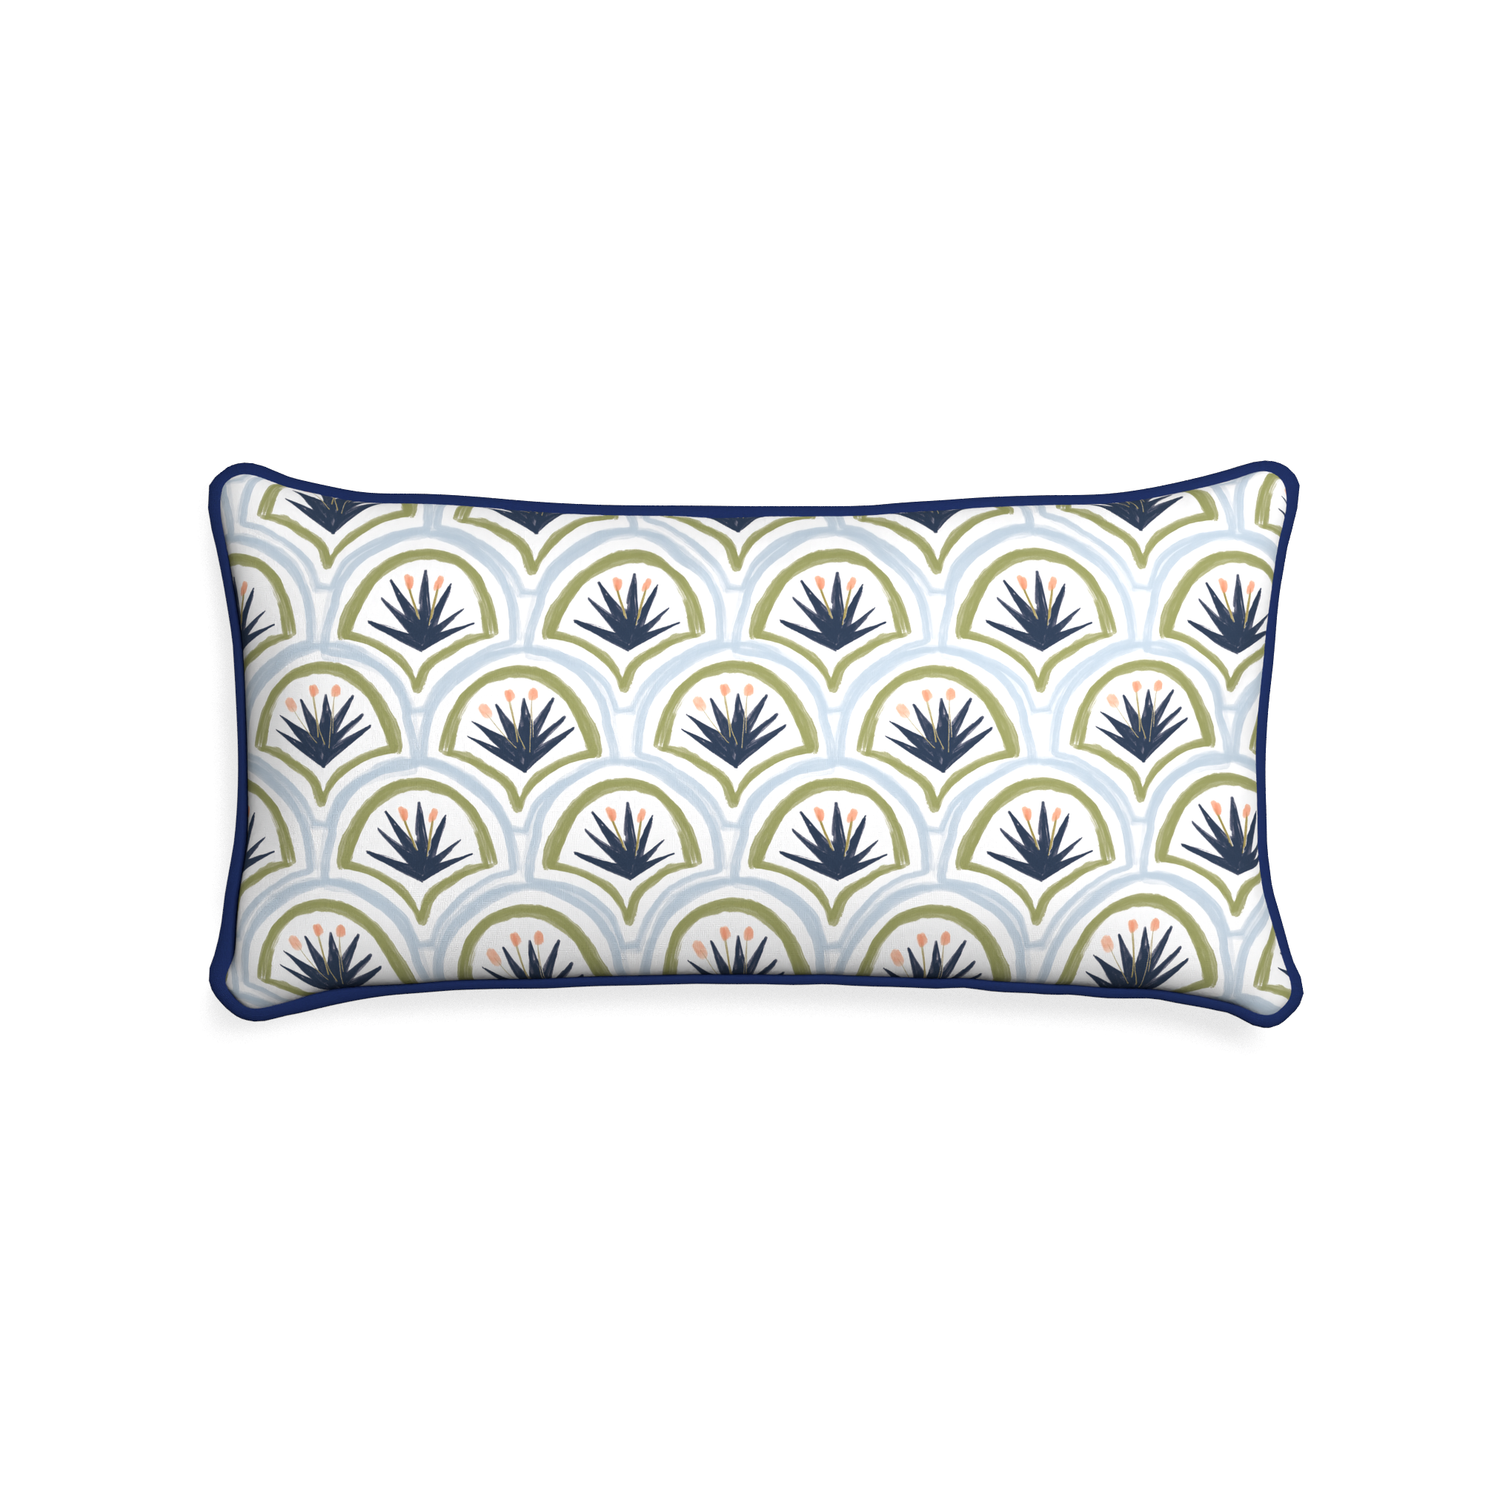 Midi-lumbar thatcher midnight custom art deco palm patternpillow with midnight piping on white background